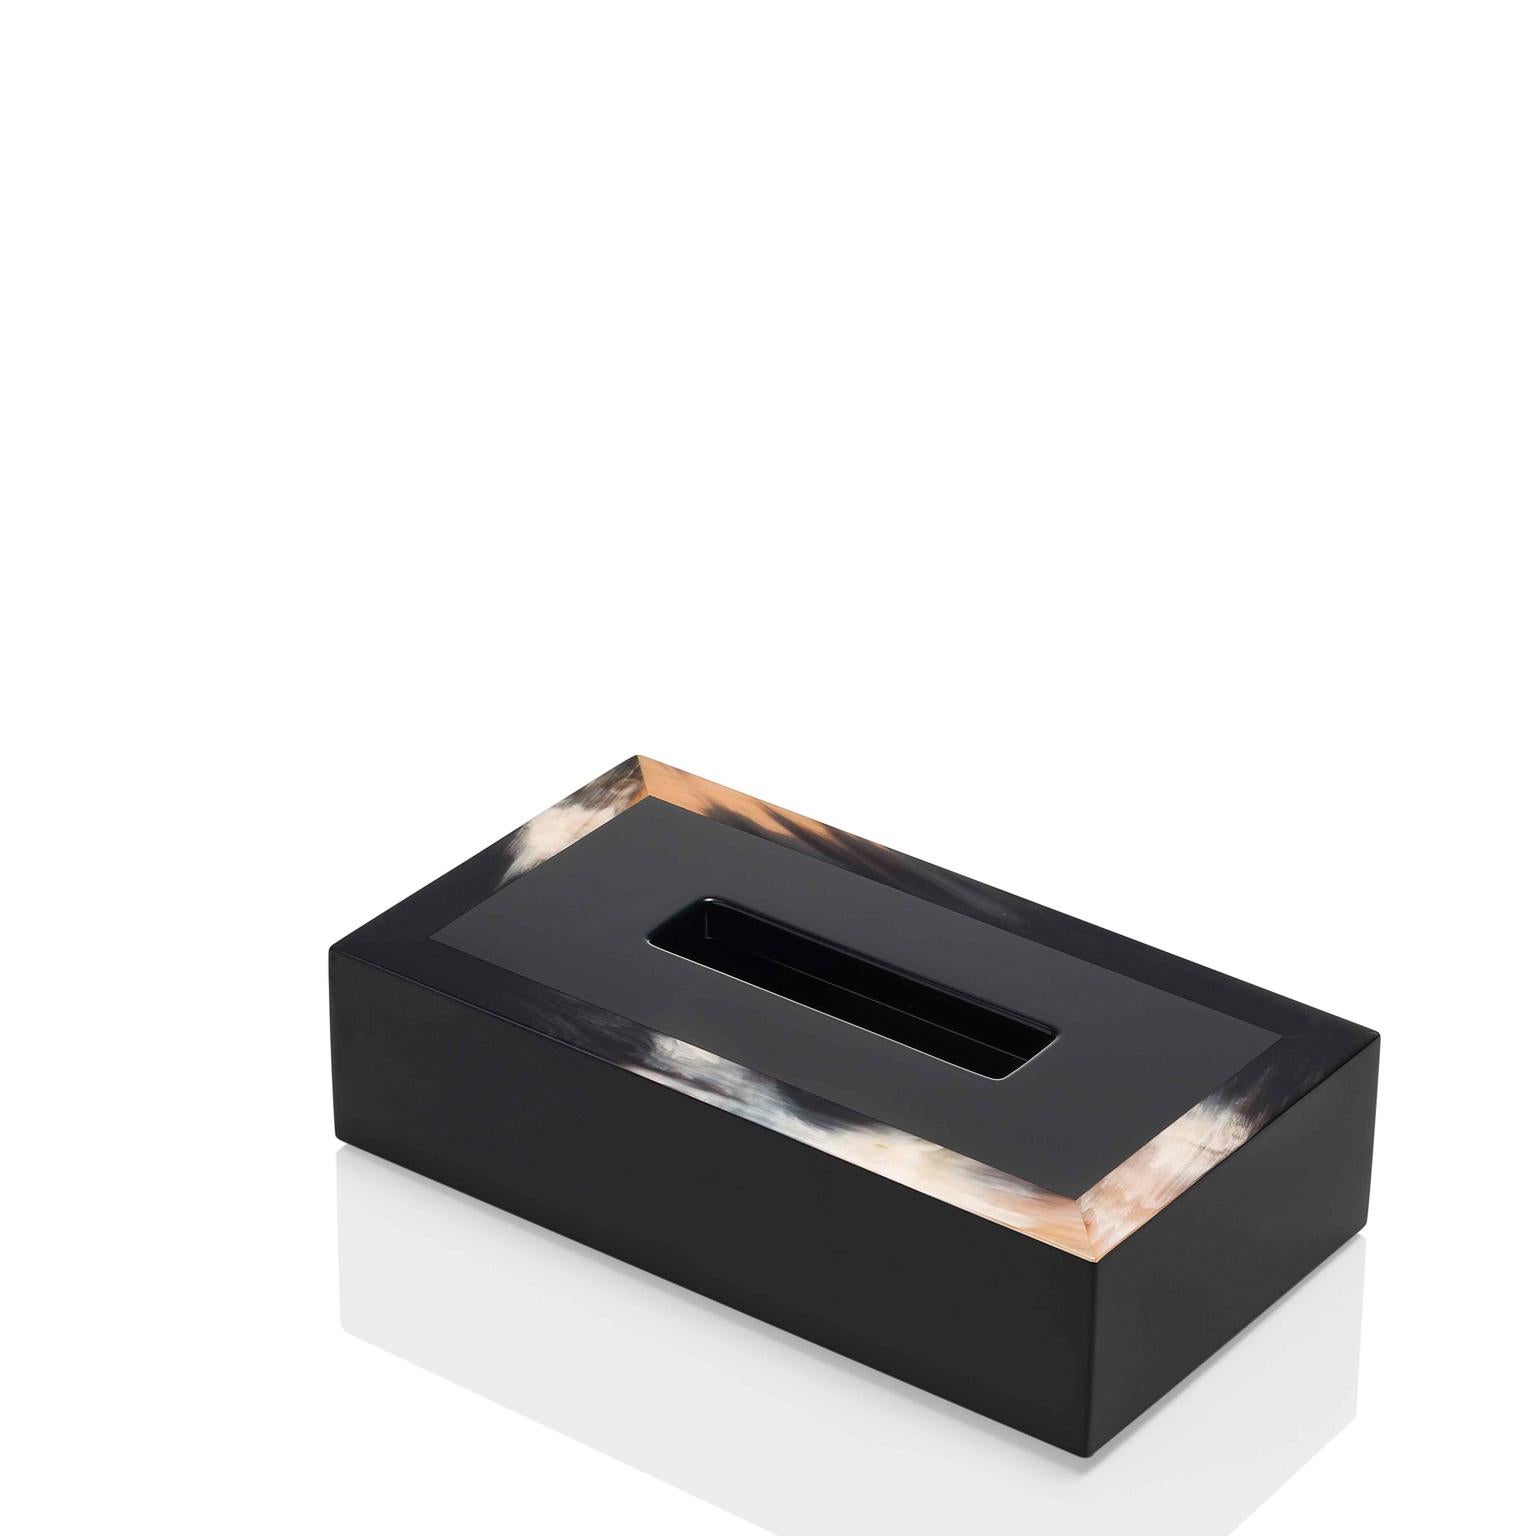 Dreamy hues and sleek design come together in our Geremia tissue box holder. Crafted of black lacquered wood with a high-gloss finish, it boasts unique details in Corno Italiano, rich in texture and warmth, elevating this everyday item into a luxury